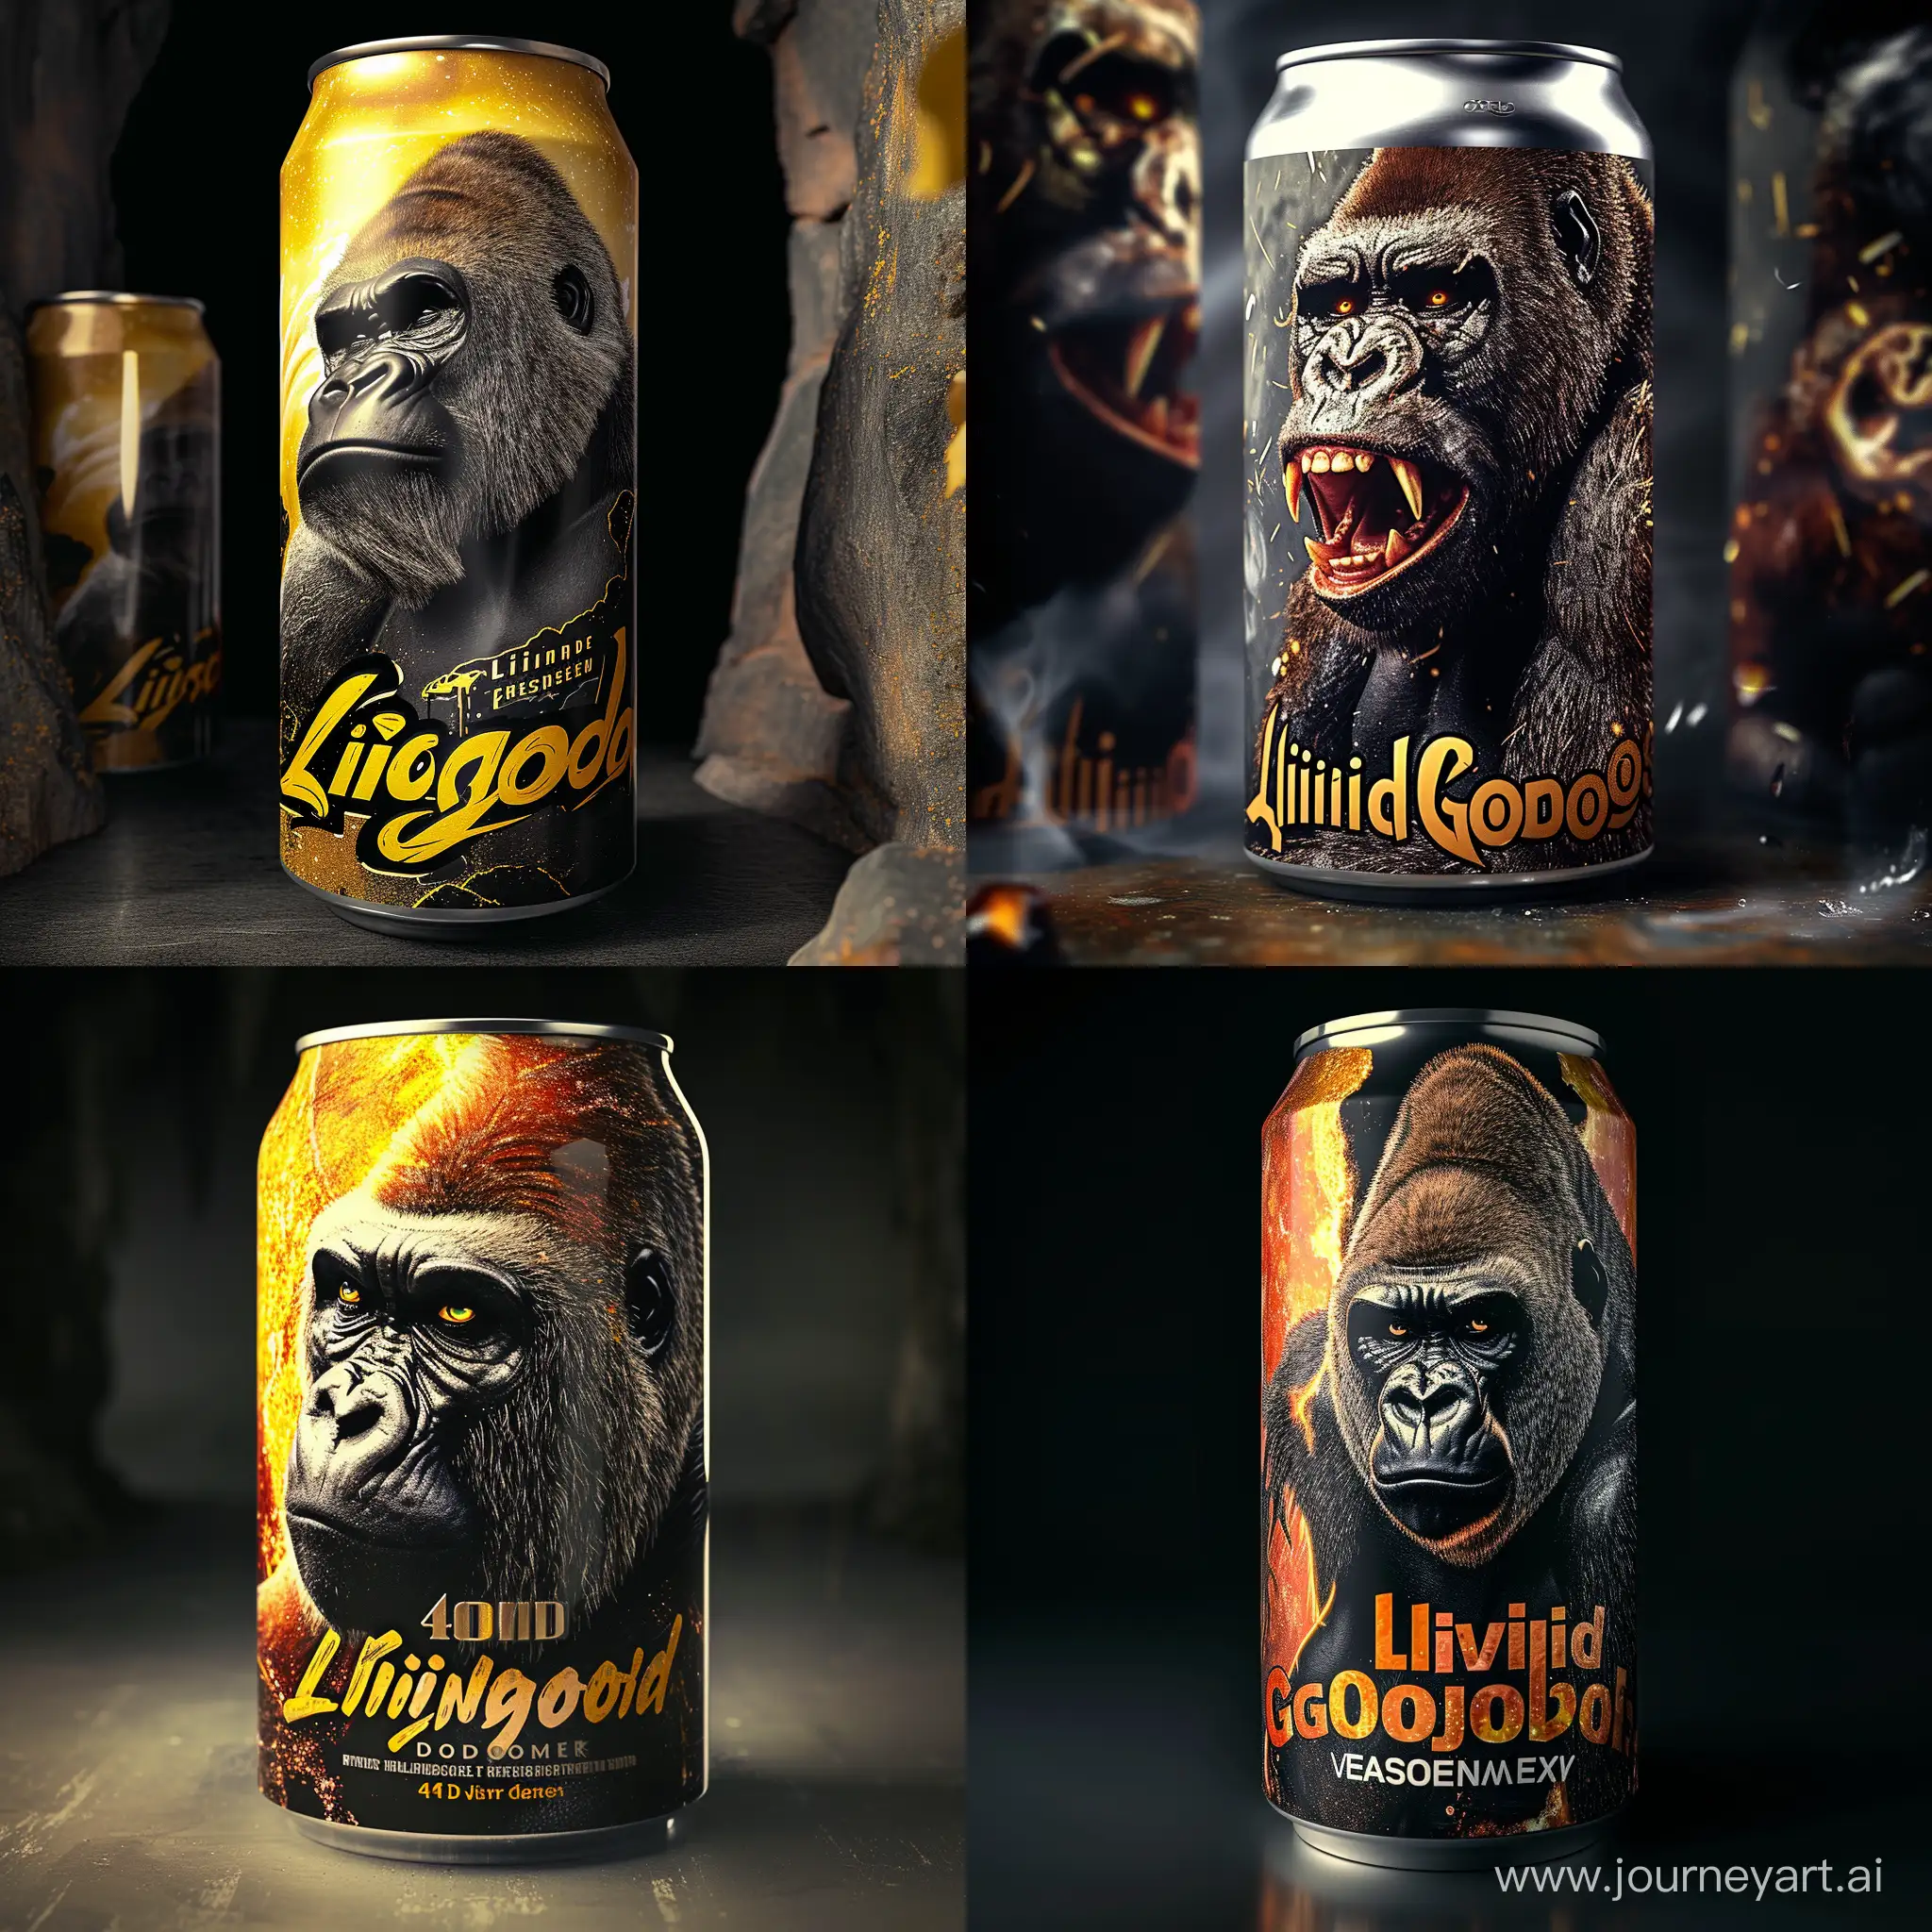 Produce a high-resolution, realistic studio image of a 4k aluminum energy drink can for the brand LiquidGorilla. Incorporate a powerful and detailed illustration of a gorilla into the can's design. Pay attention to the details, such as the fur texture and facial expression, to make the gorilla image lifelike. Ensure that the overall composition is visually appealing and aligns with the energy drink theme. Use dynamic lighting and shadows to enhance the realism of the scene.